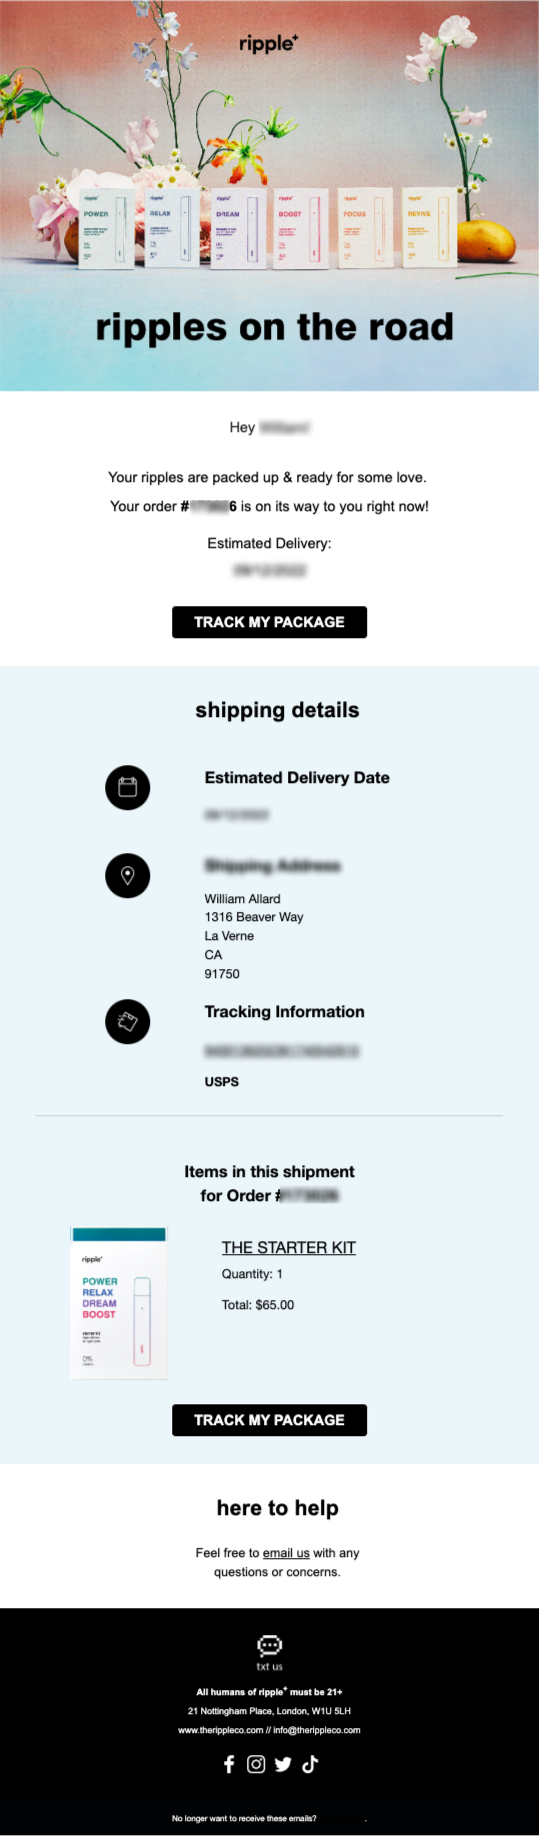 The Ripple Shipment Created Industry Email Template screenshot